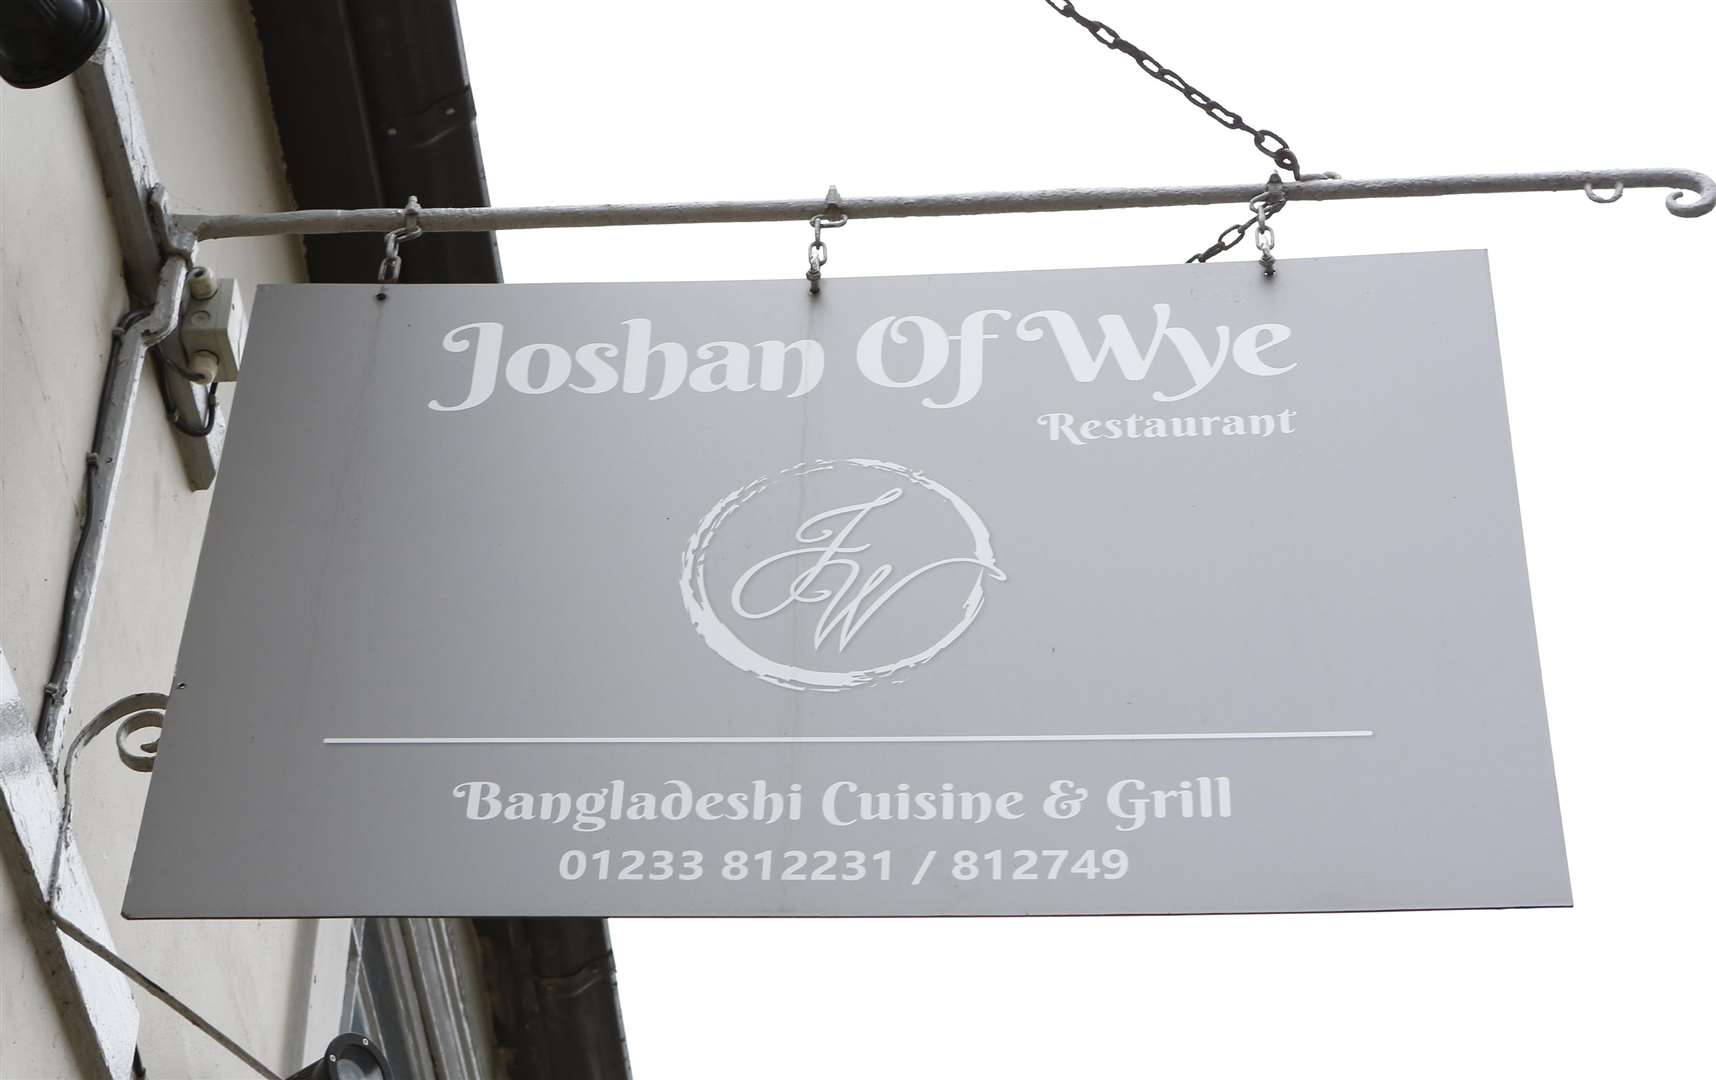 The Joshan of Wye is reopening today. Picture: Andy Jones